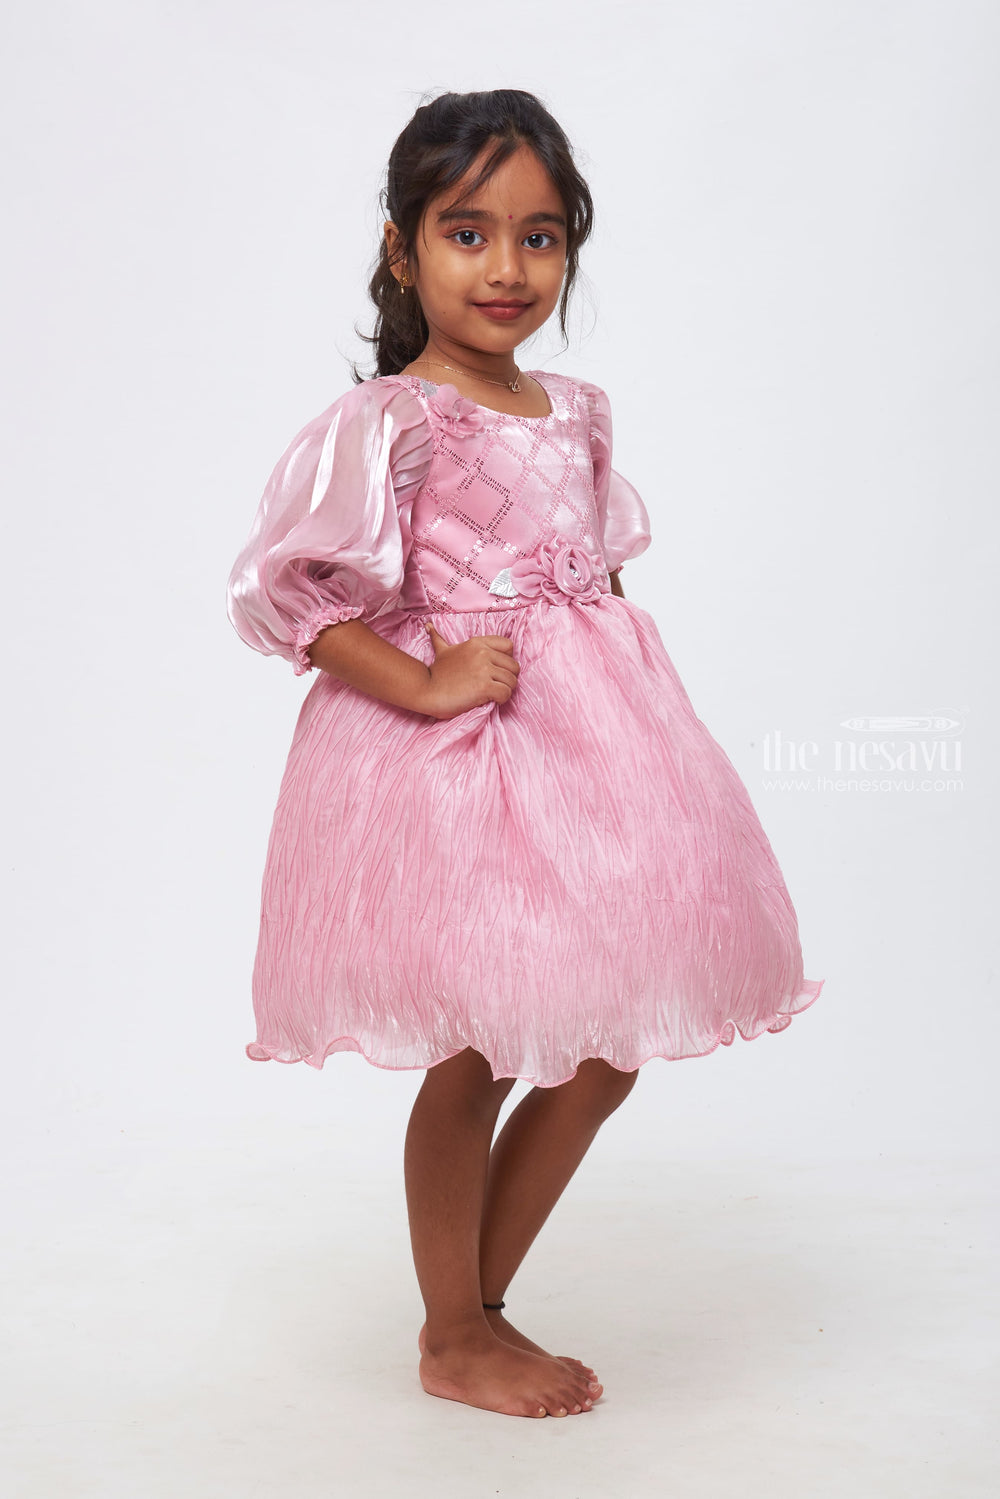 The Nesavu Girls Fancy Party Frock Purple Dreams: Girls Enchanting Lilac Dress with Floral Embellishments Nesavu Celebrate in Style | Exquisite Party Frocks for Young Divas | The Nesavu